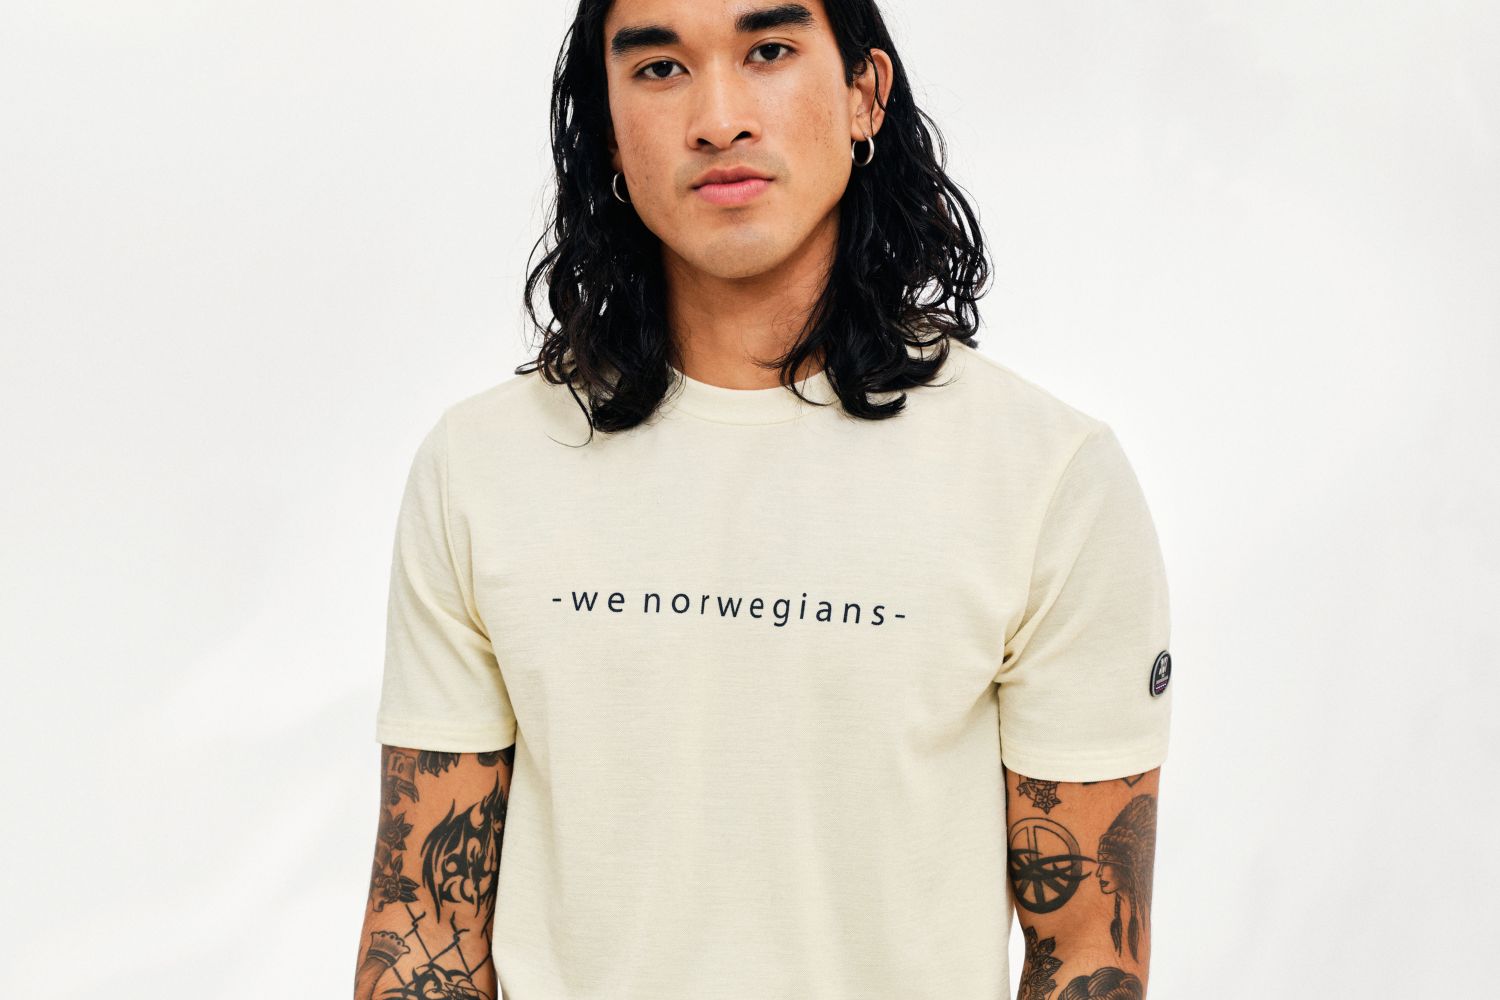 we norwegians - merino for summer outfit: t shirt with logo